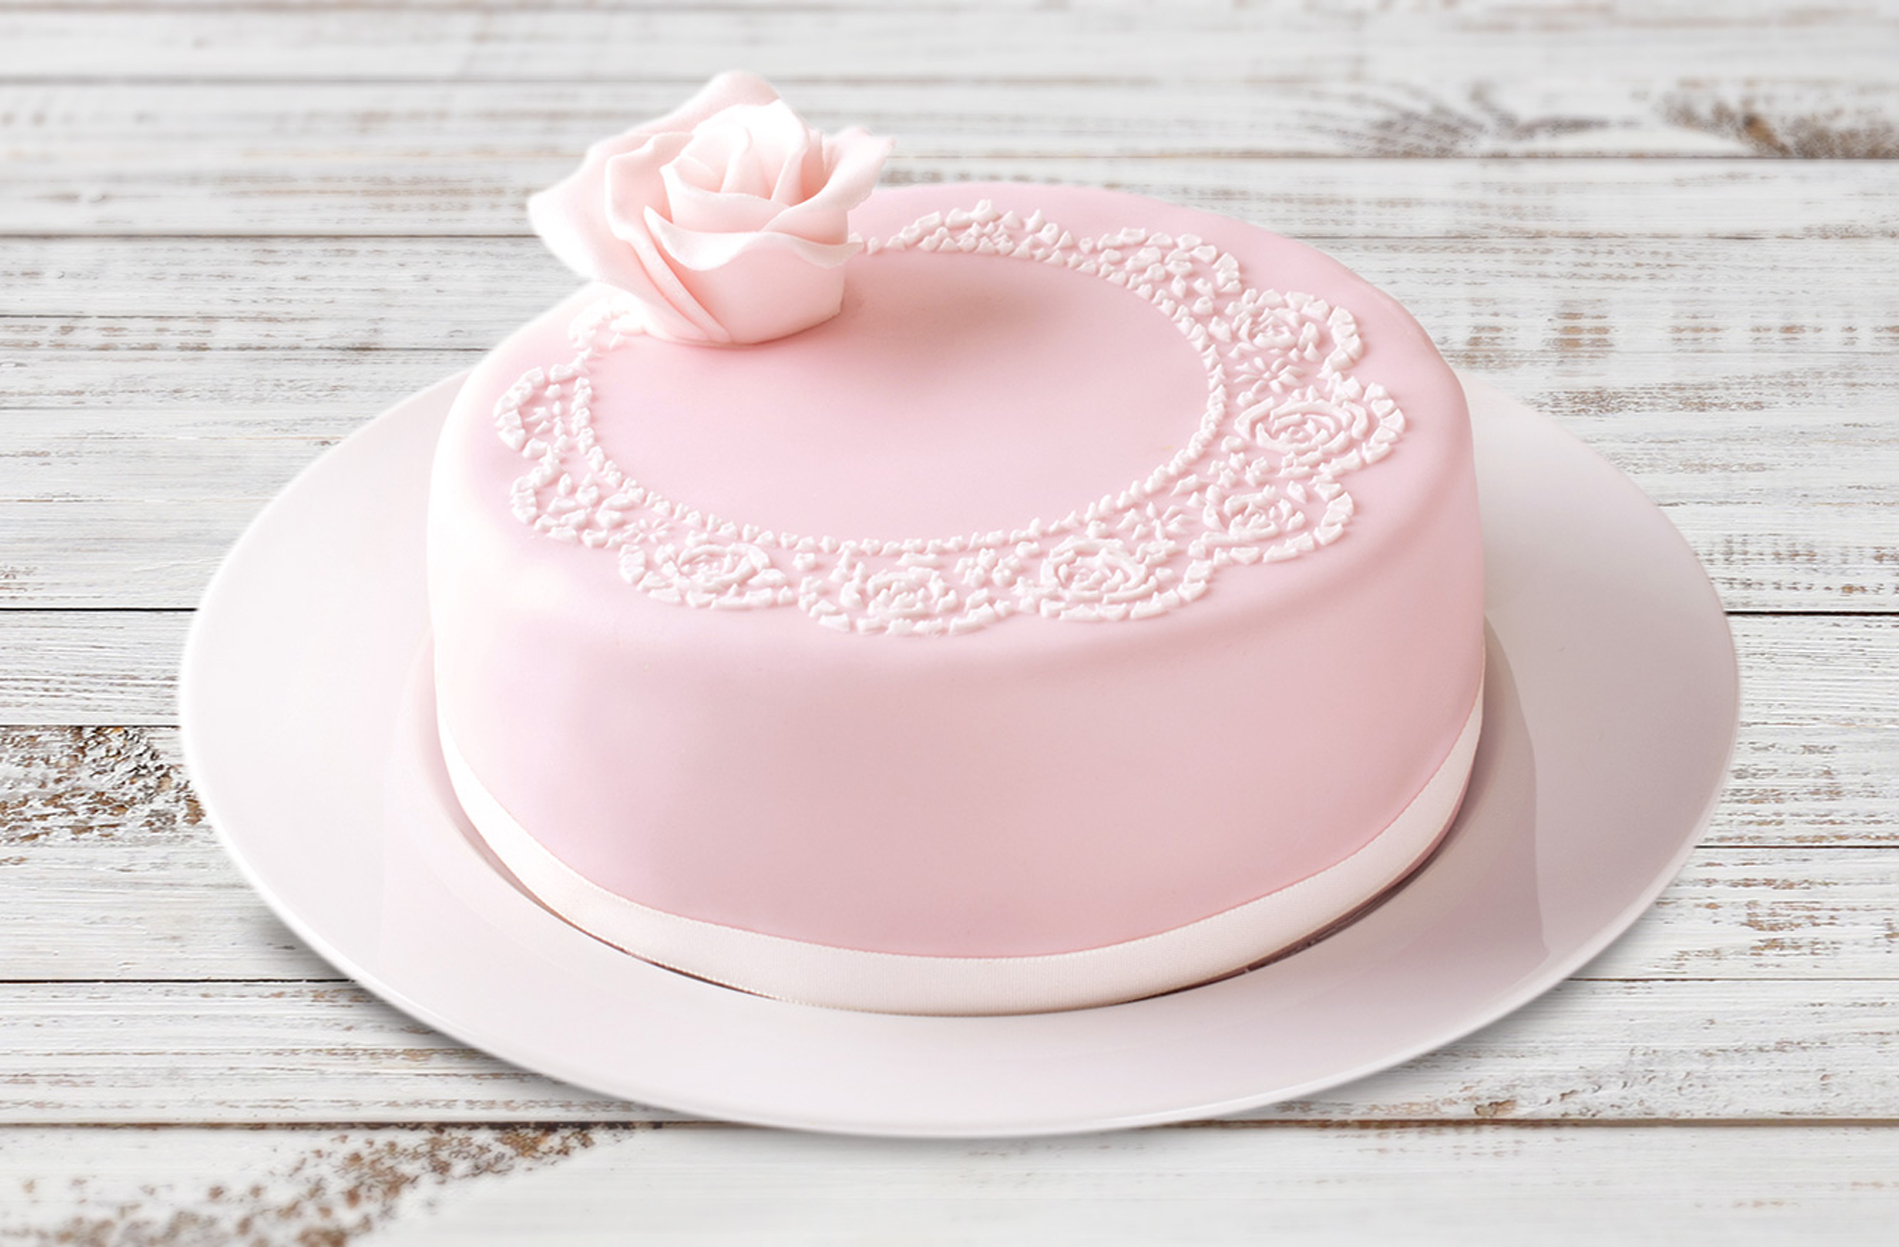 Marry Berry's rose cake (Finsbury Food Group/PA)